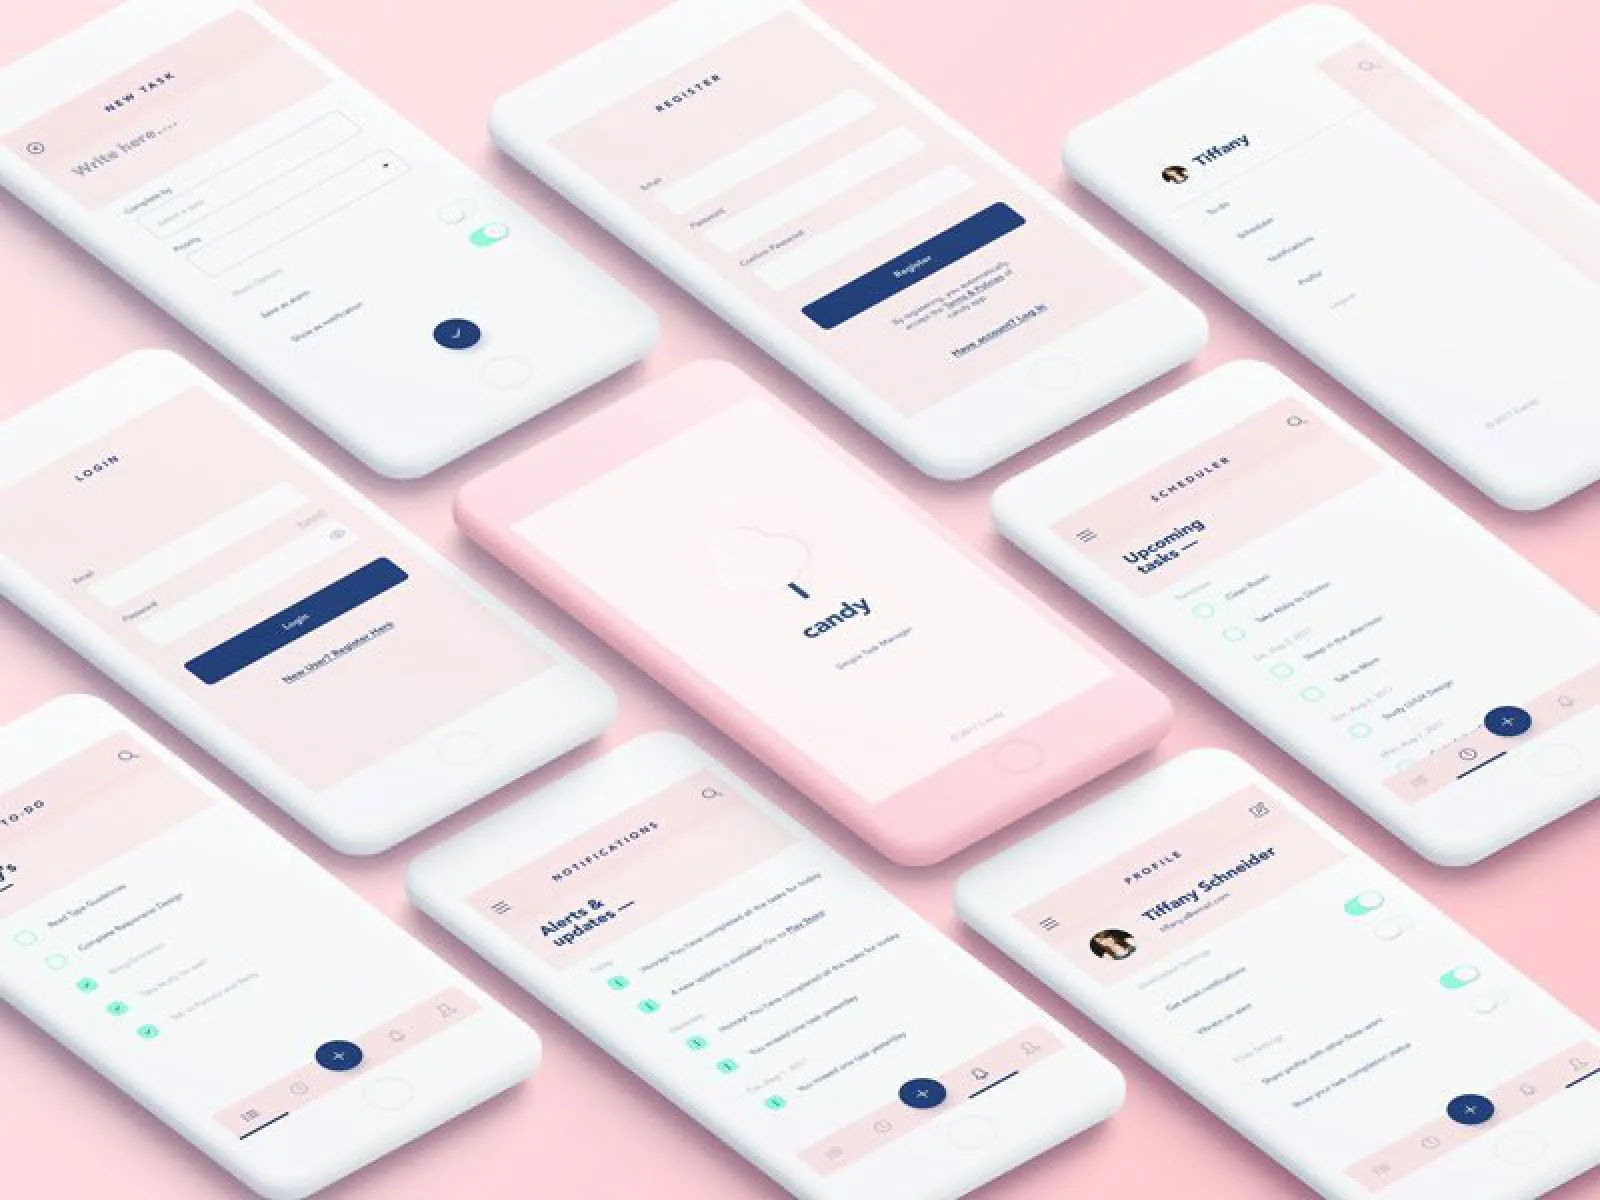 Candy Free App Design UI Kit for Figma and Adobe XD